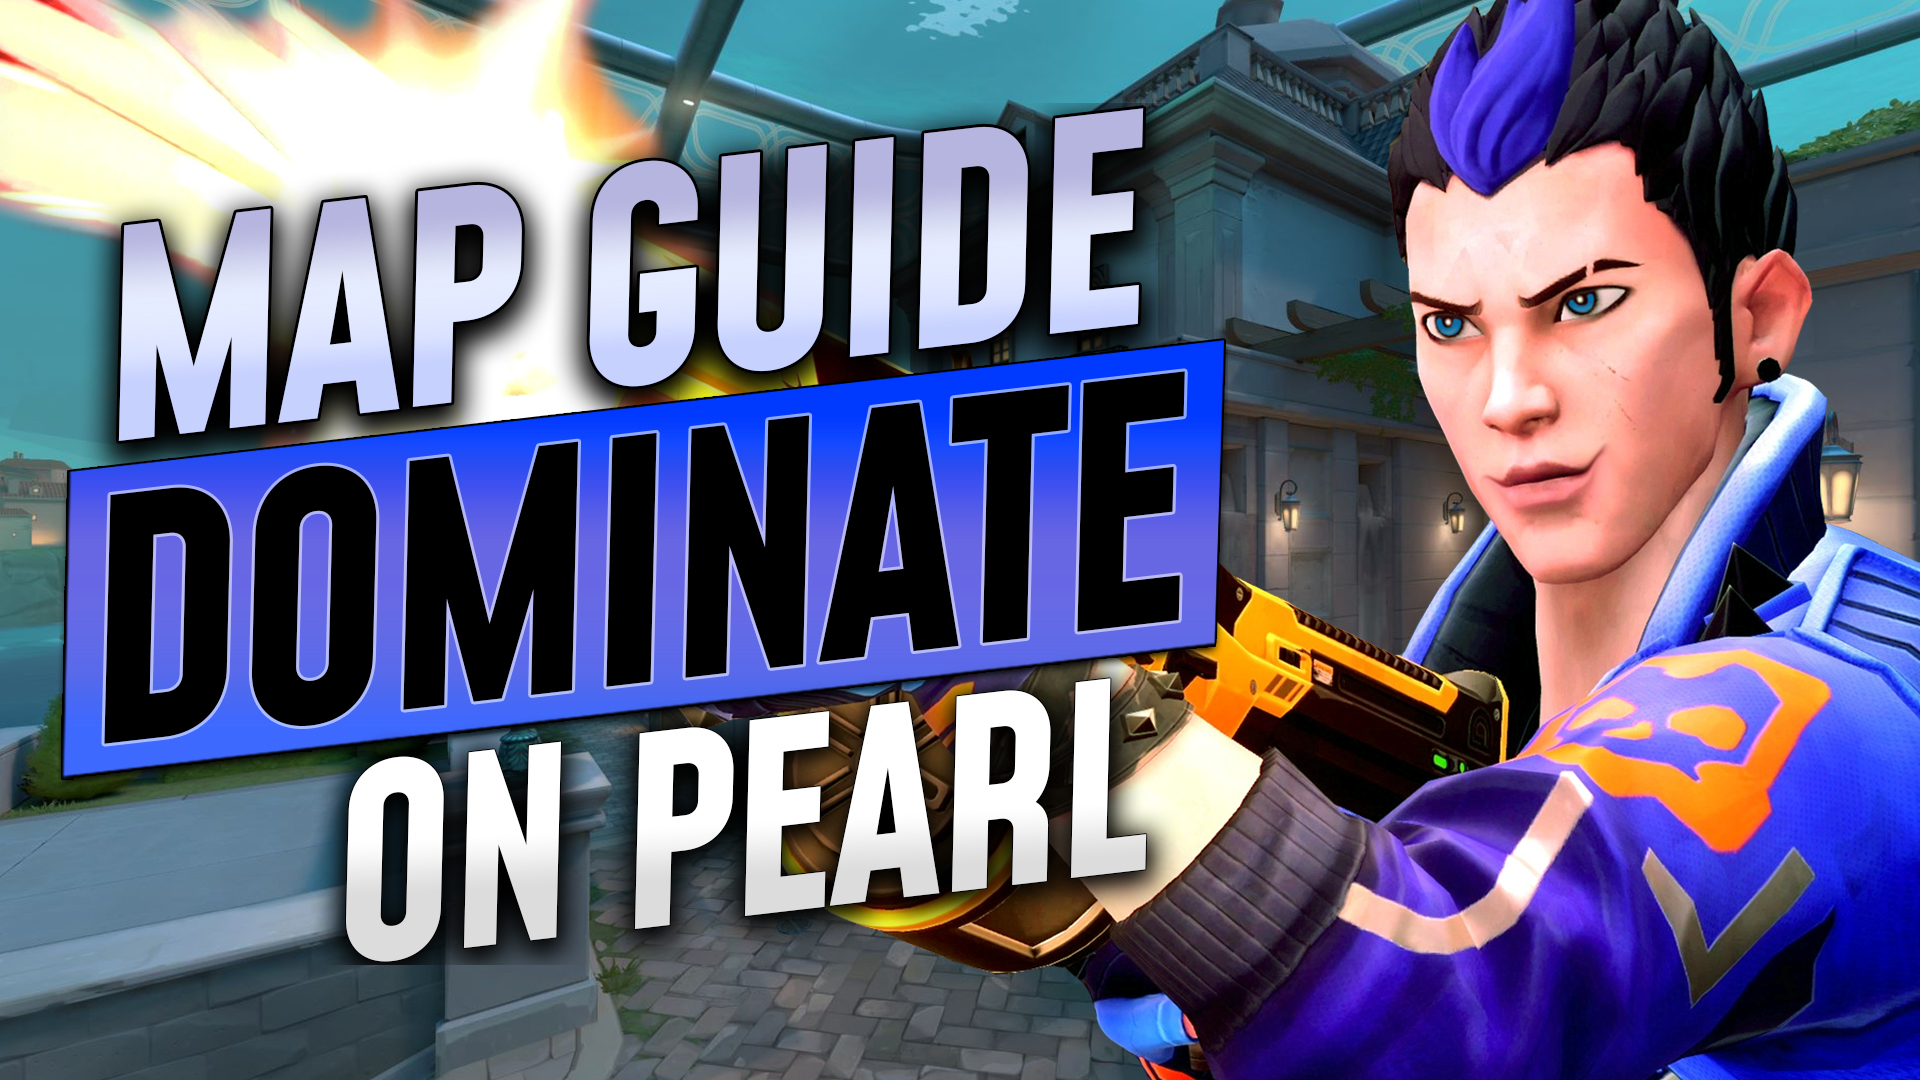 How to Dominate Pearl as Viper - GameLeap